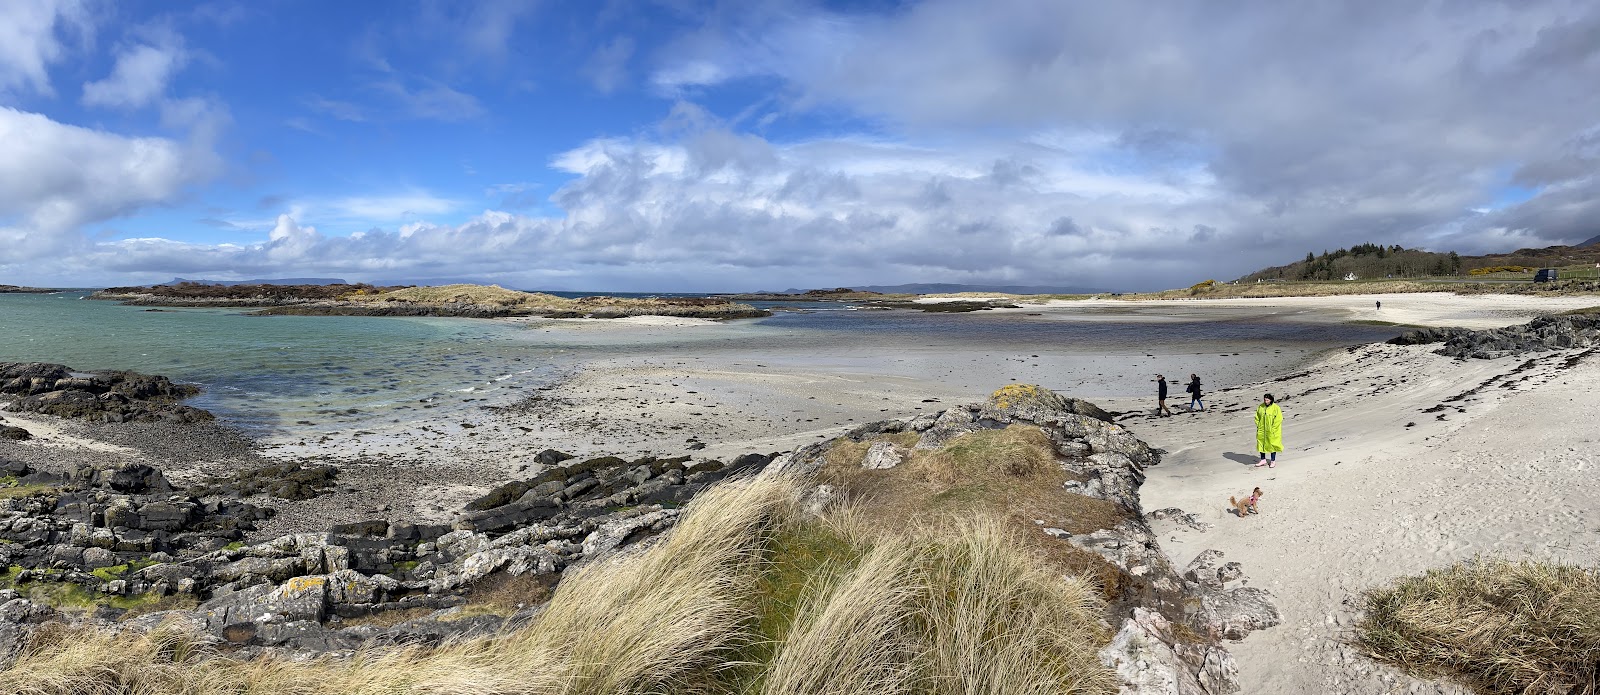 Photo of Traigh Beach with small bay